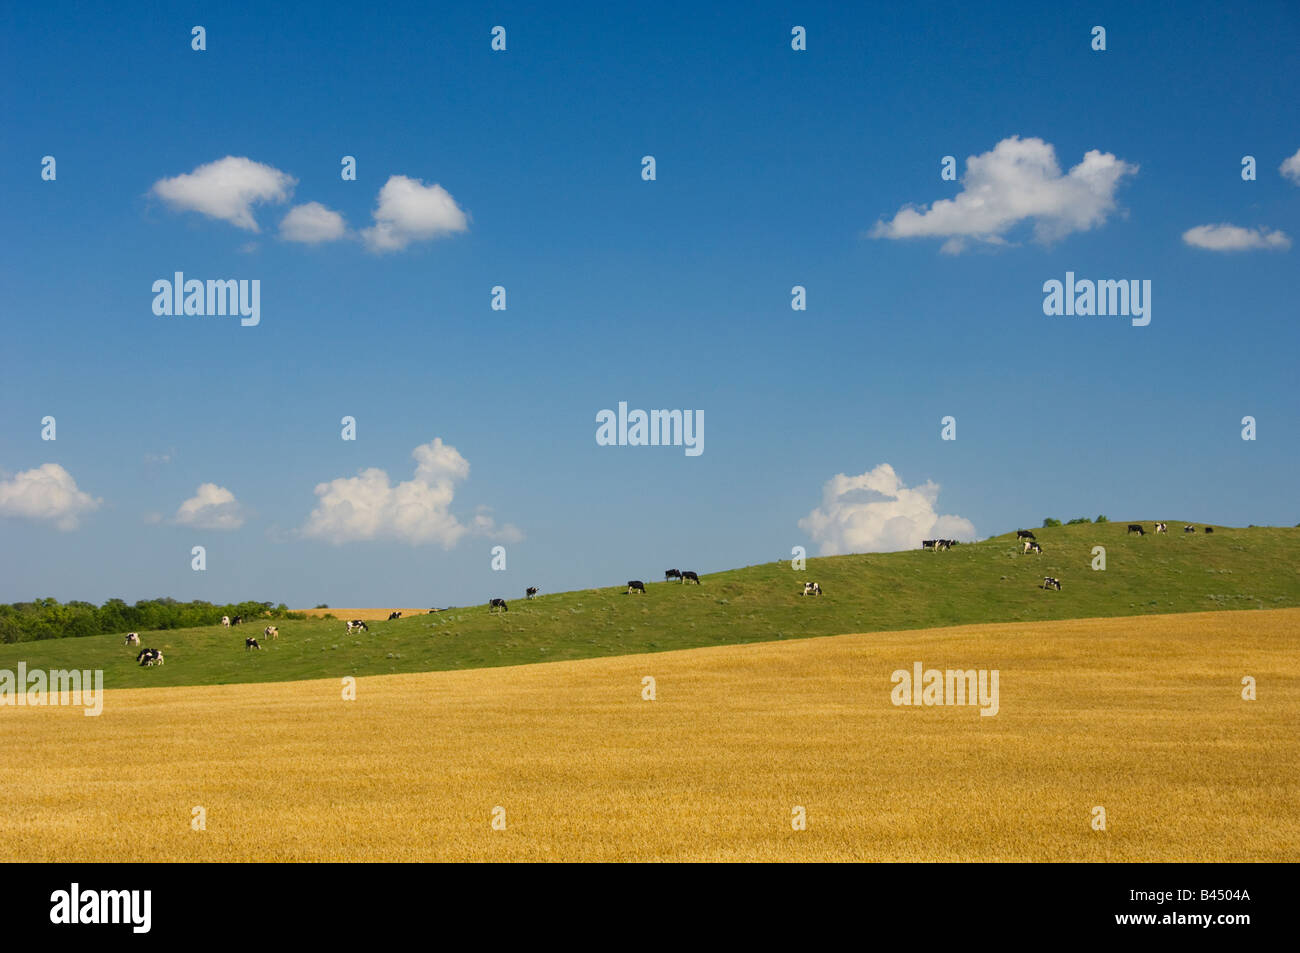 A field of ripe wheat with cows grazing on a hillside near Holland Manitoba Canada Stock Photo